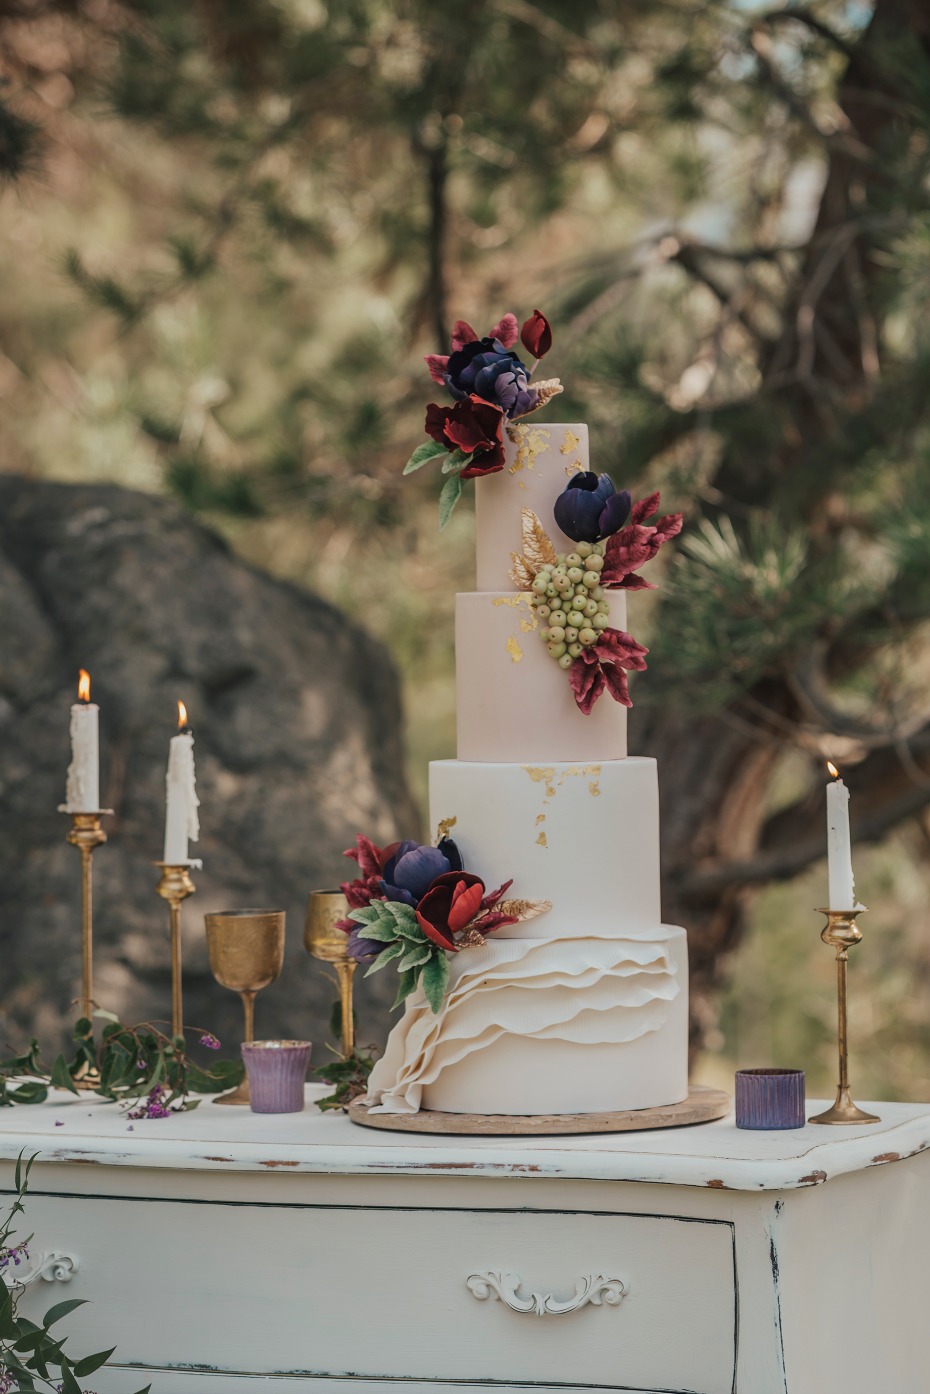 Gold foil wedding cake with edible flowers